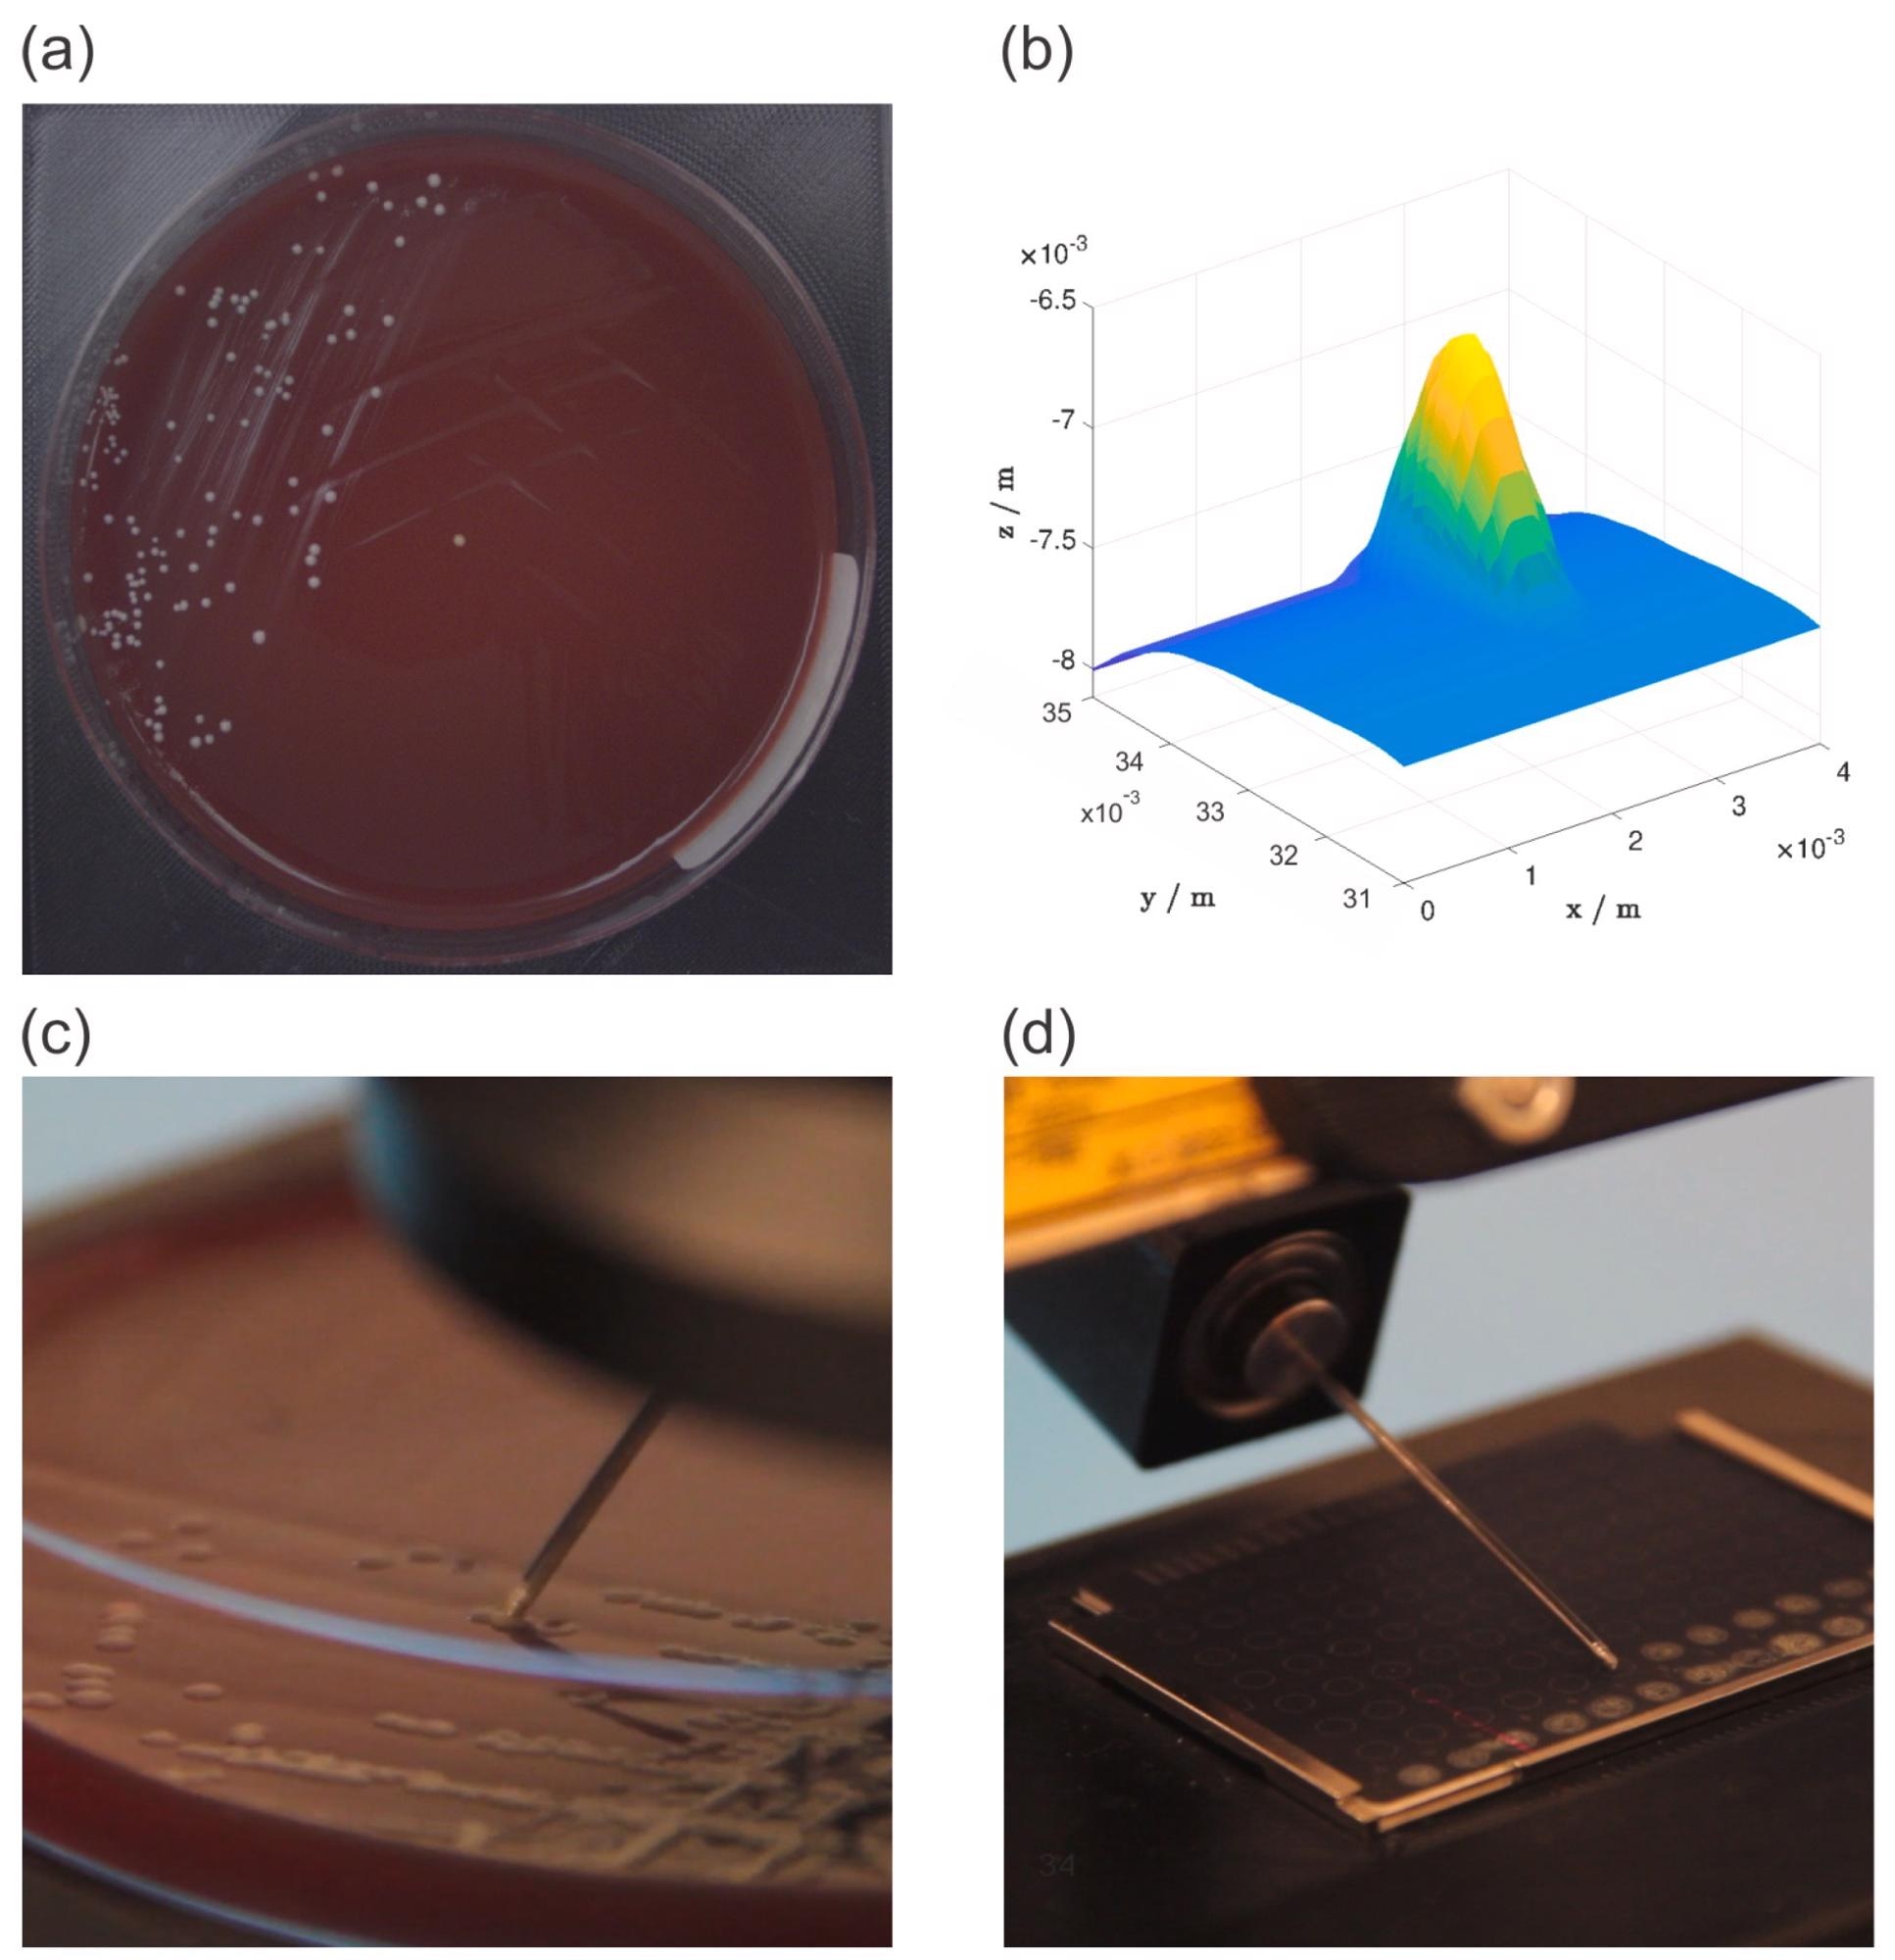 Overview of the experiment workflow: an image of a petri dish acquired with an RGB camera (a), a 3D model of the selected bacterial colony generated from 2D laser profiles (b), the bacterial colony picking process (c), and the bacterial colony deposition process (d).